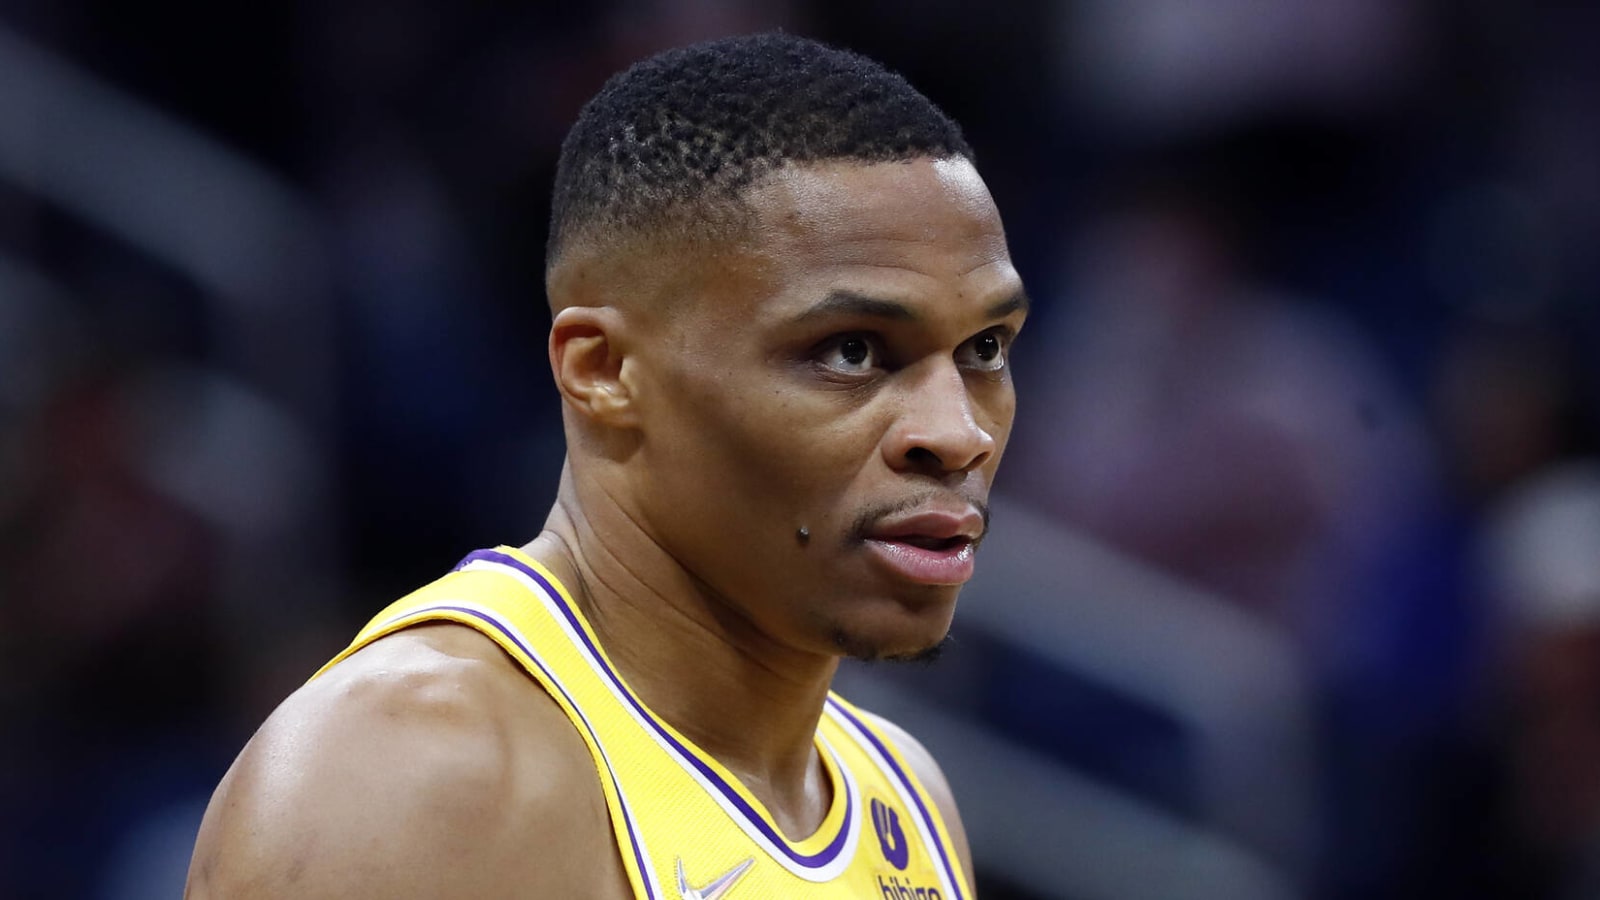 'NBA 2K' downgrades Russell Westbrook's rating